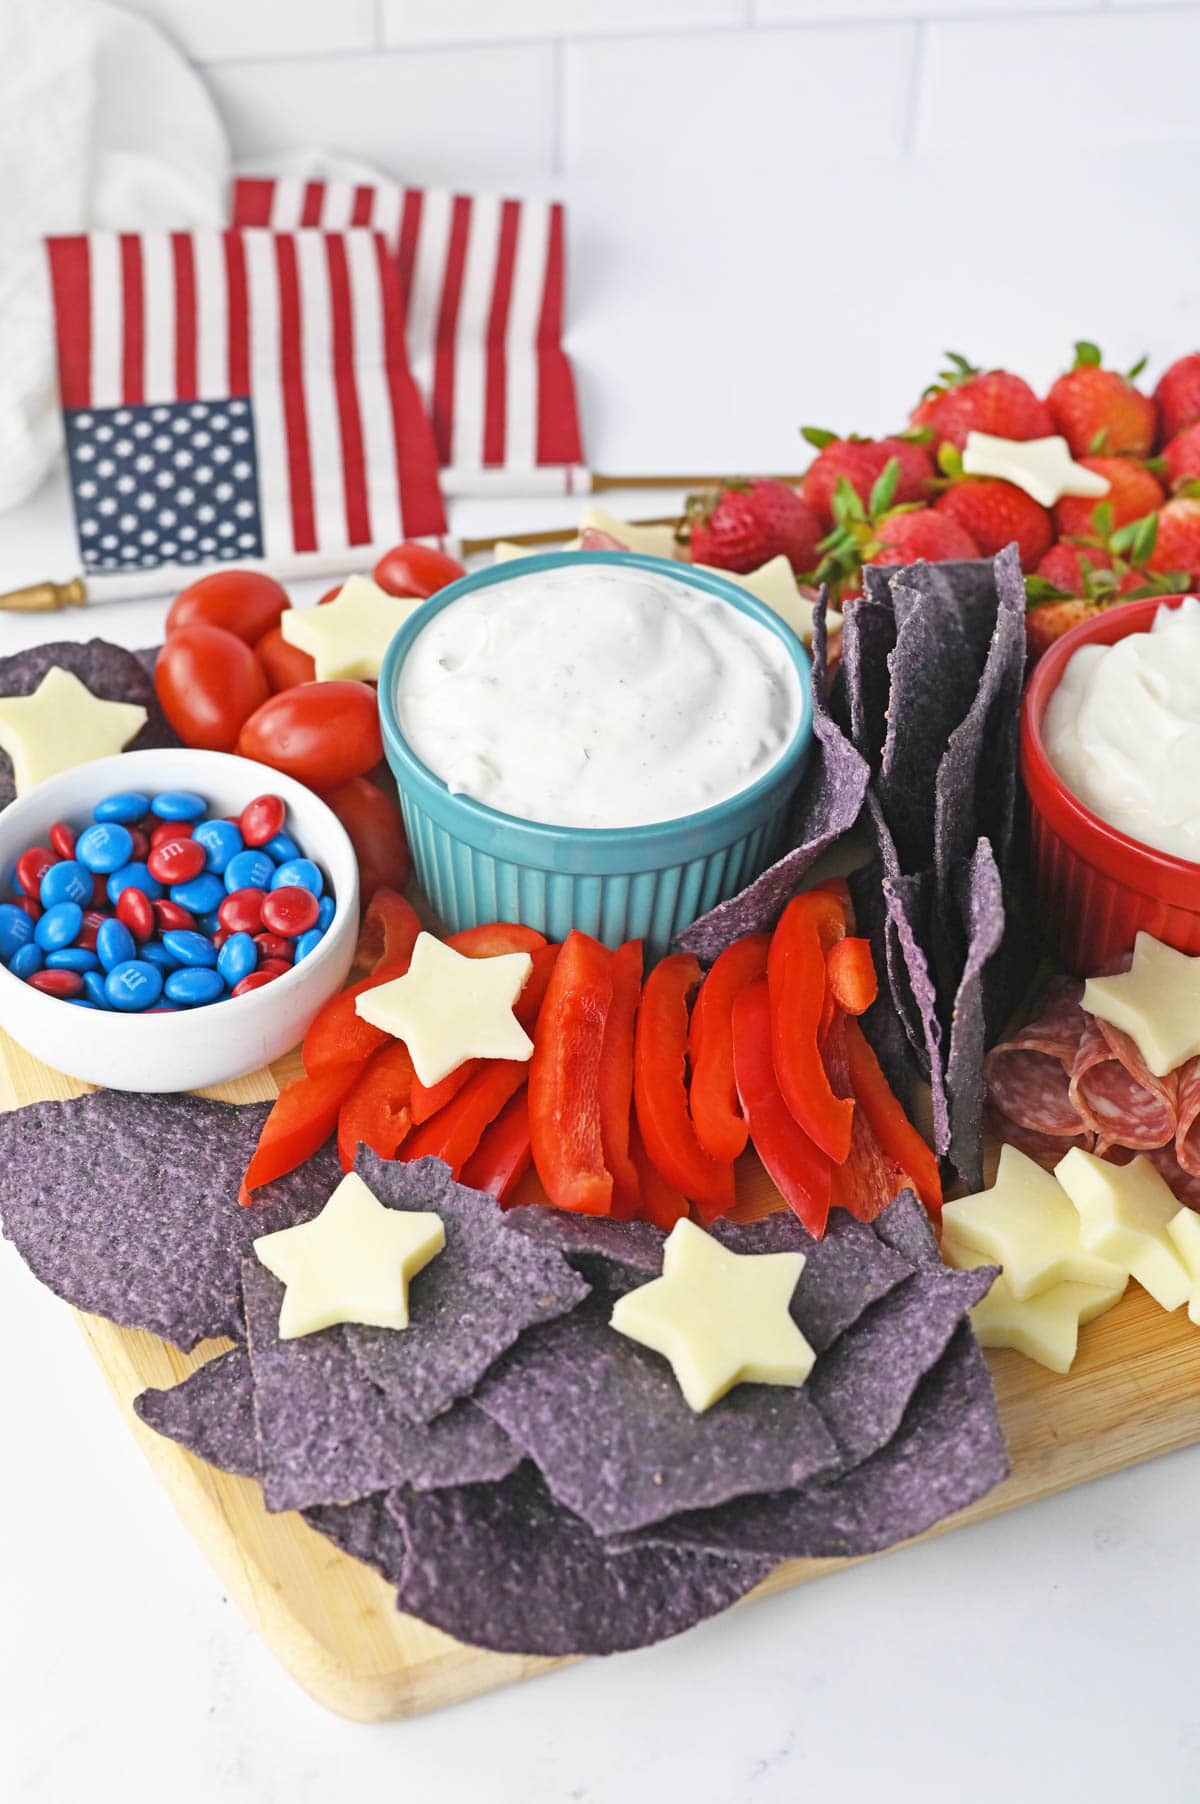 Charcuterie board with red, white and blue food